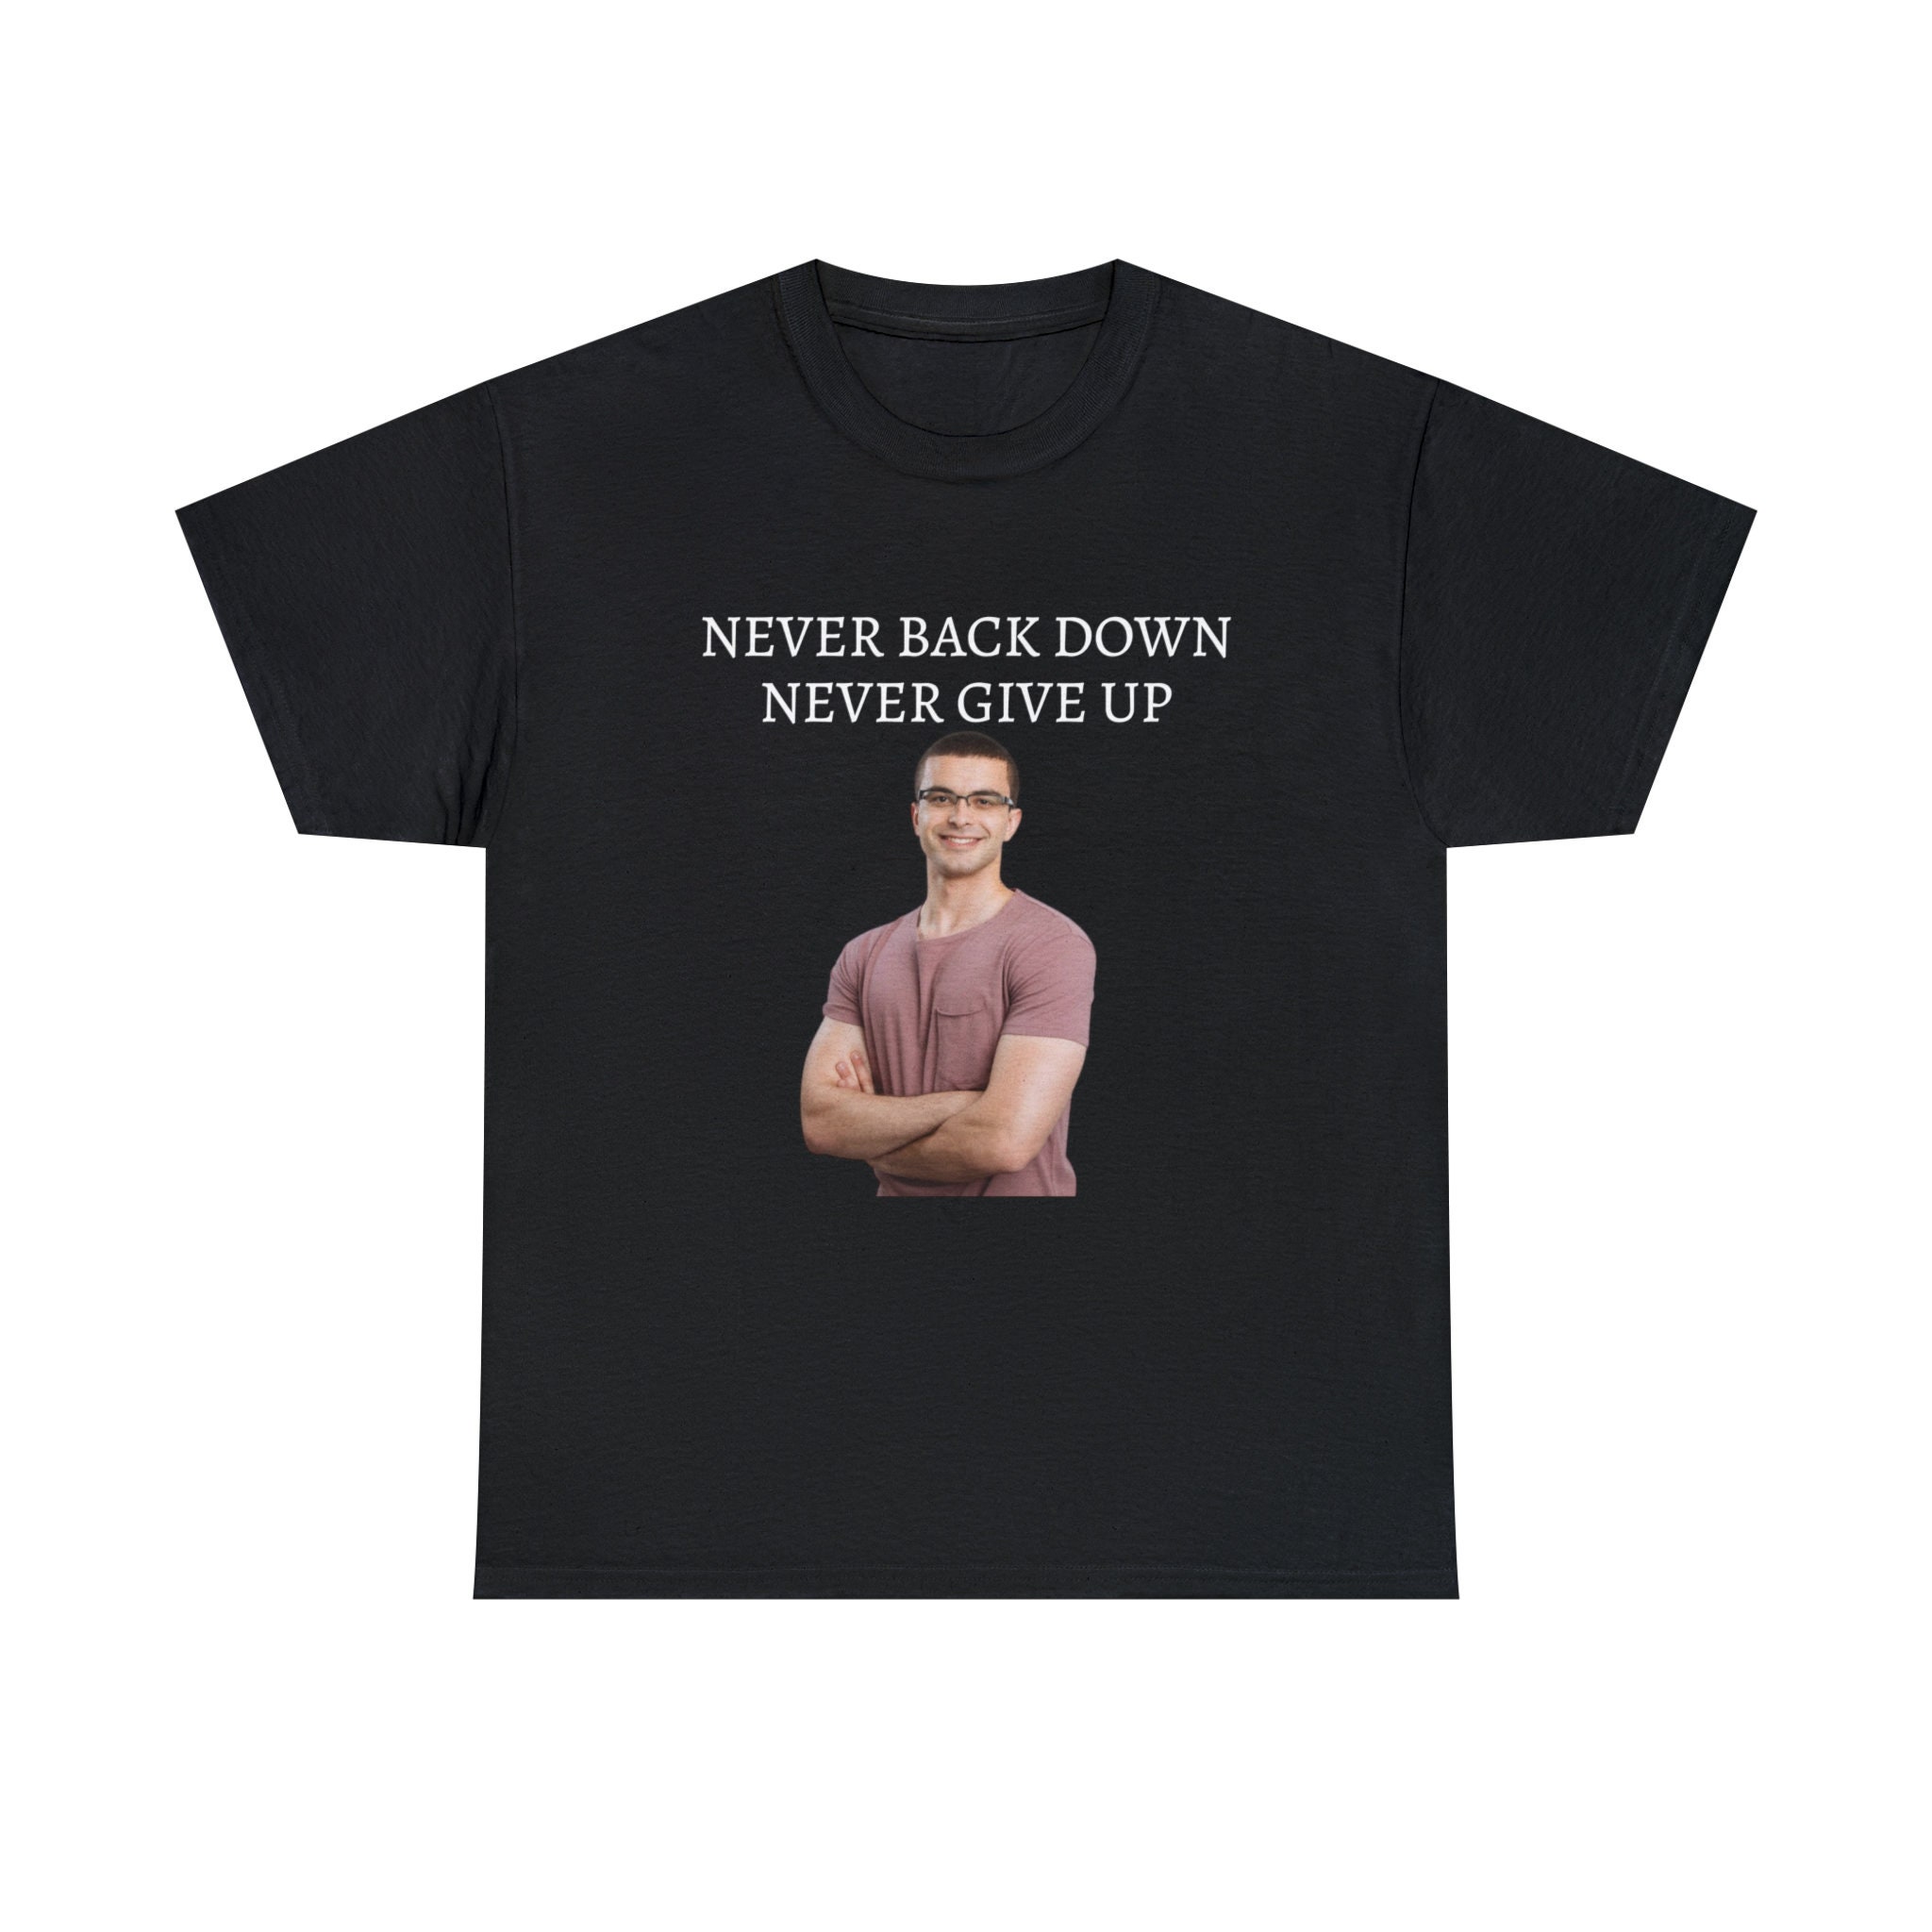 Never Back Down Never What? Meme Poster for Sale by NateCF